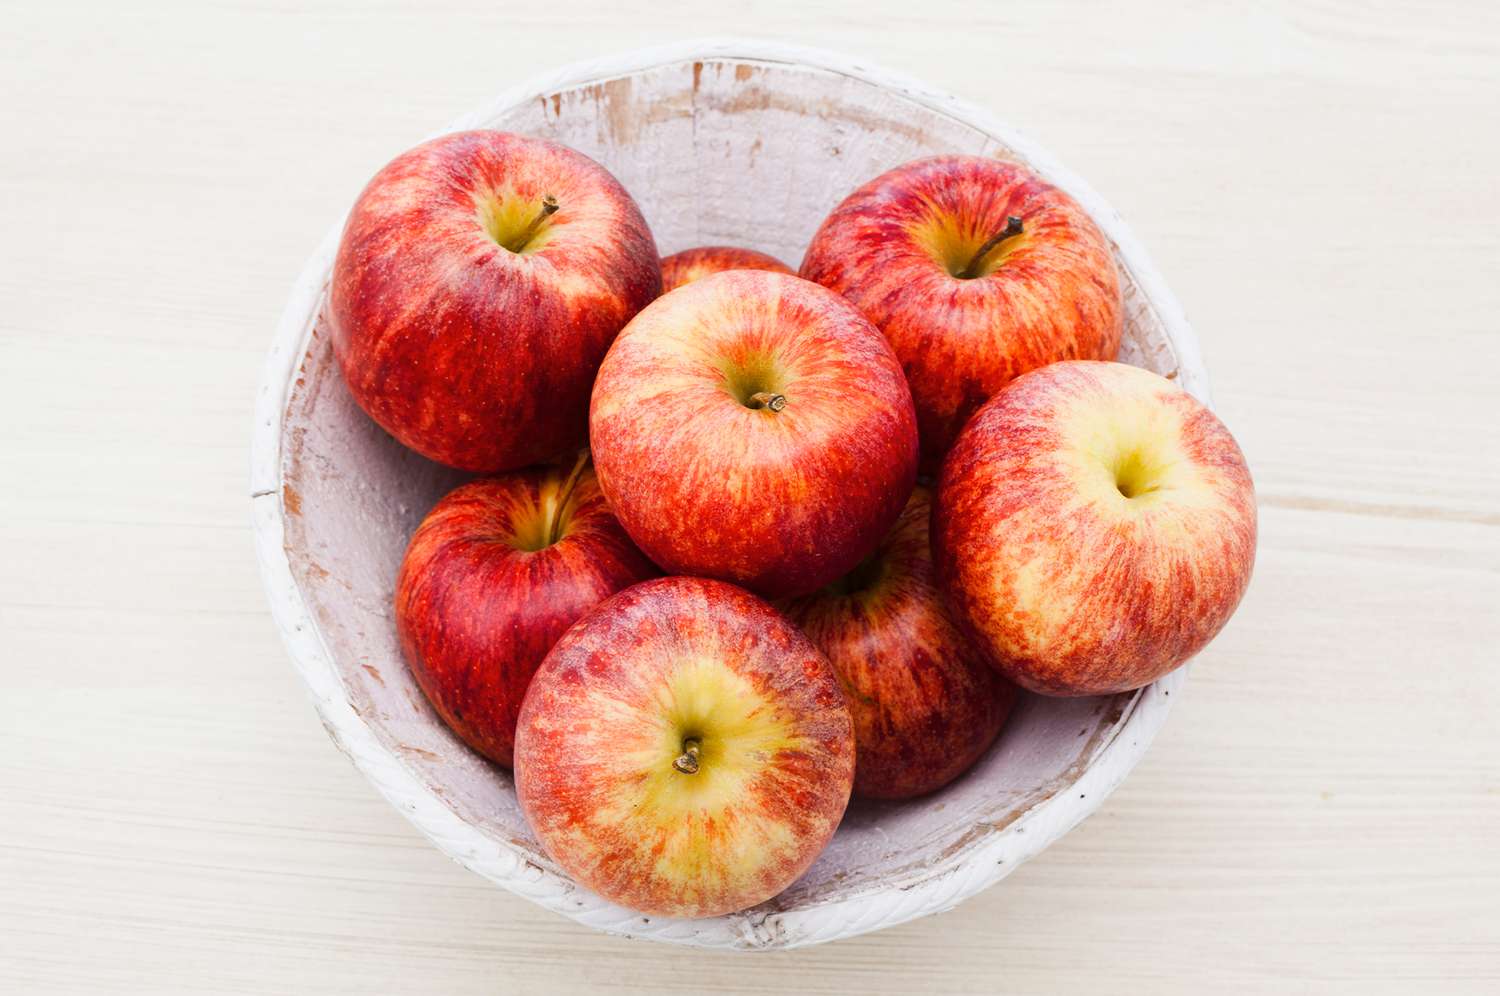 How To Store Apples To Last Longer